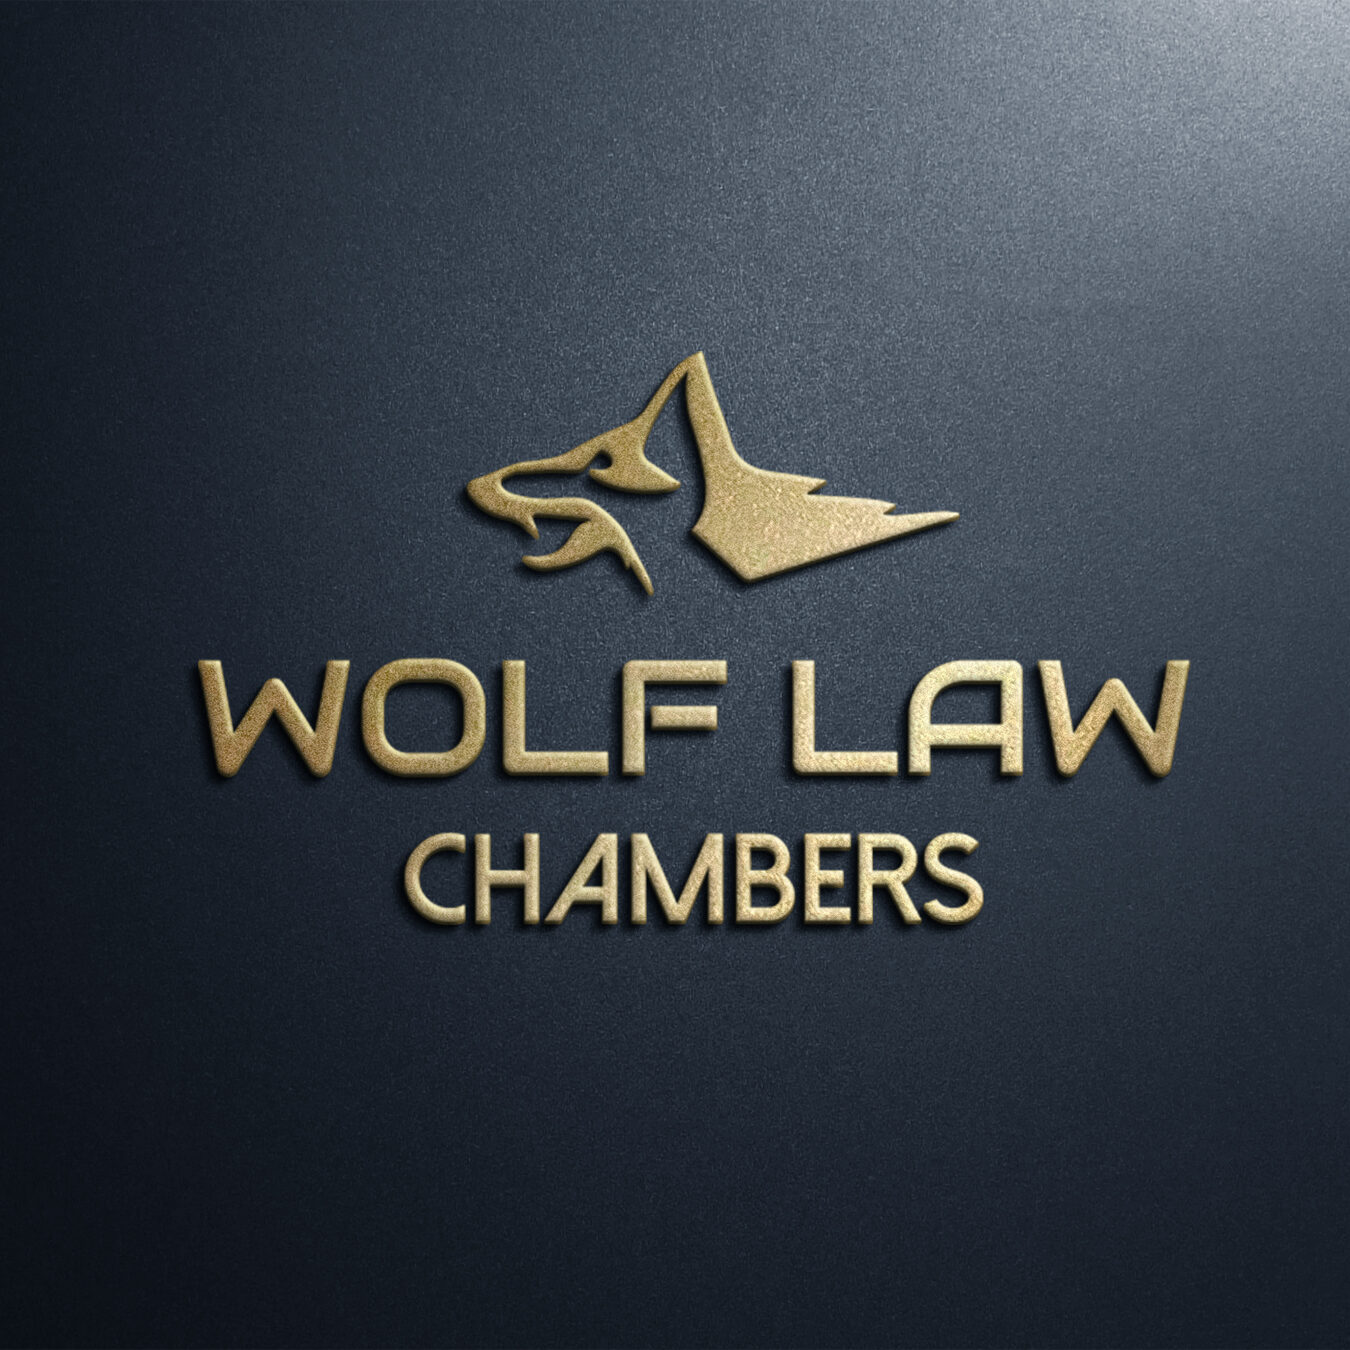 Wolf Law Chambers